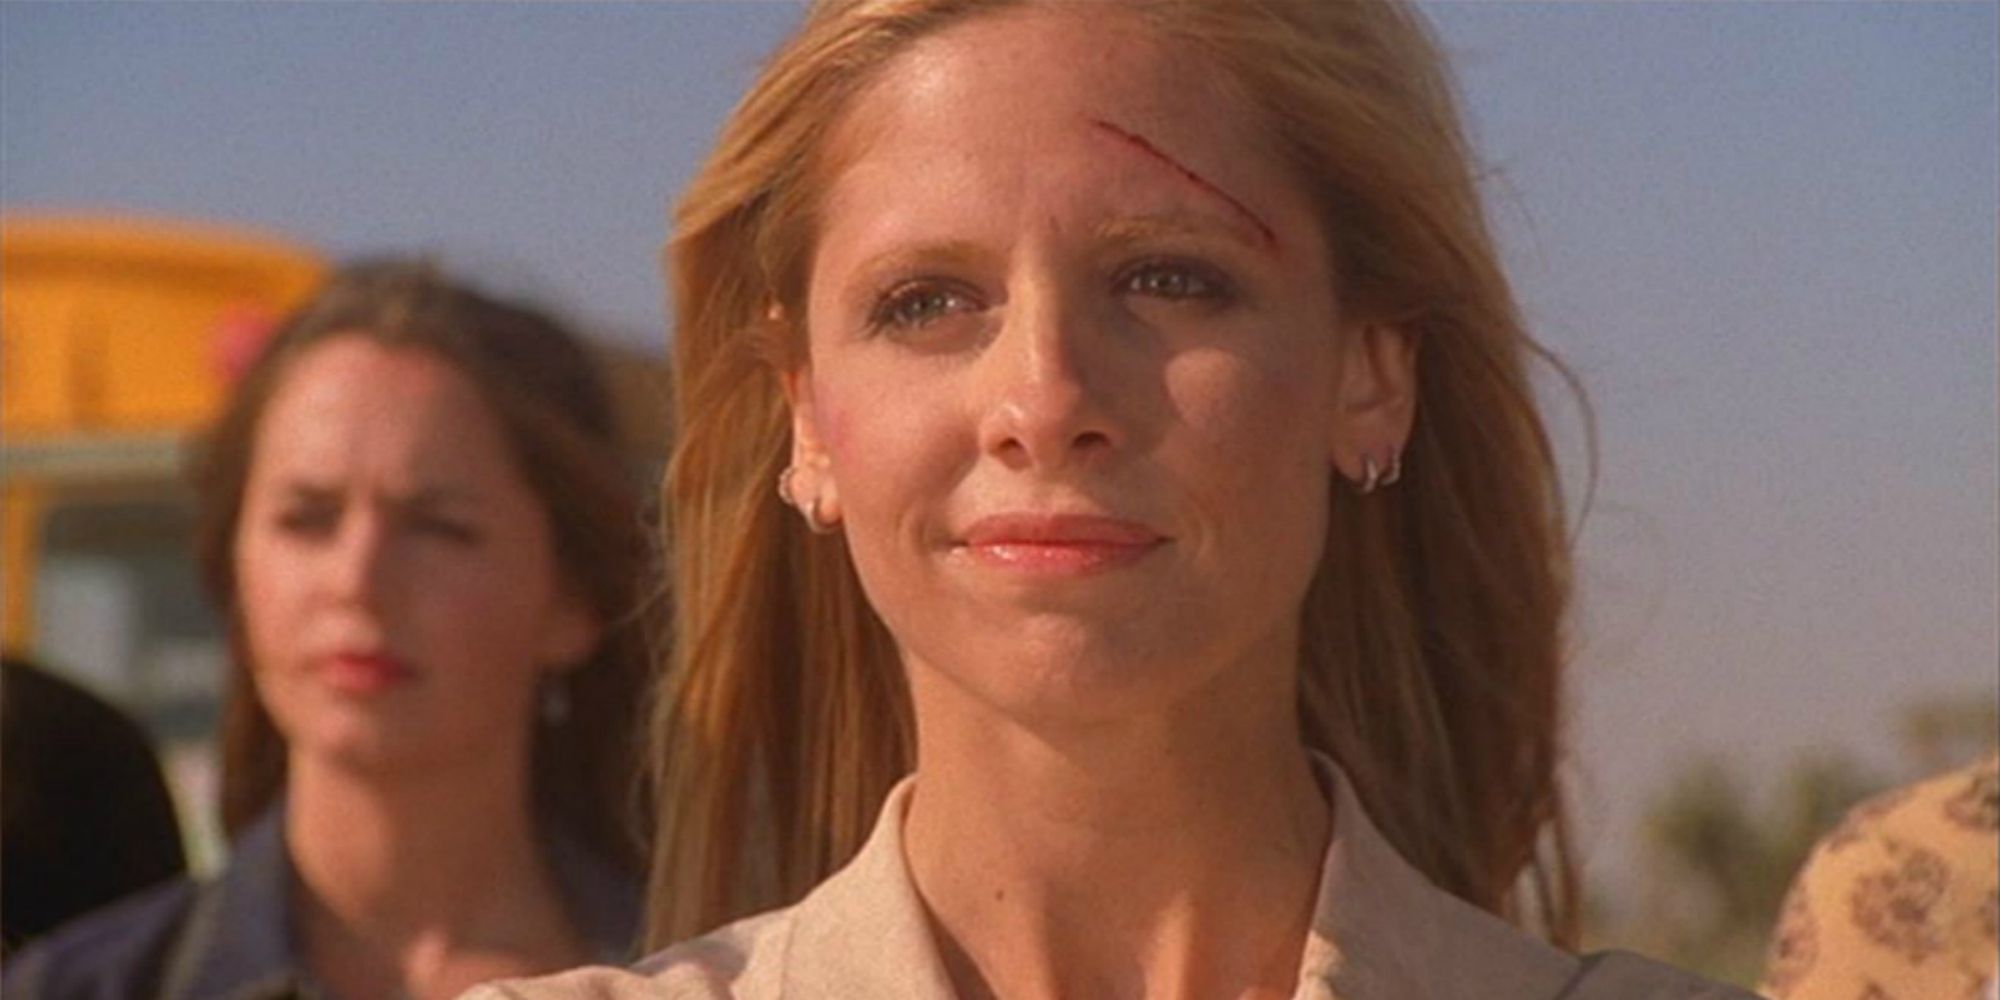 Buffy Summers smiling in the series finale of Buffy The Vampire Slayer